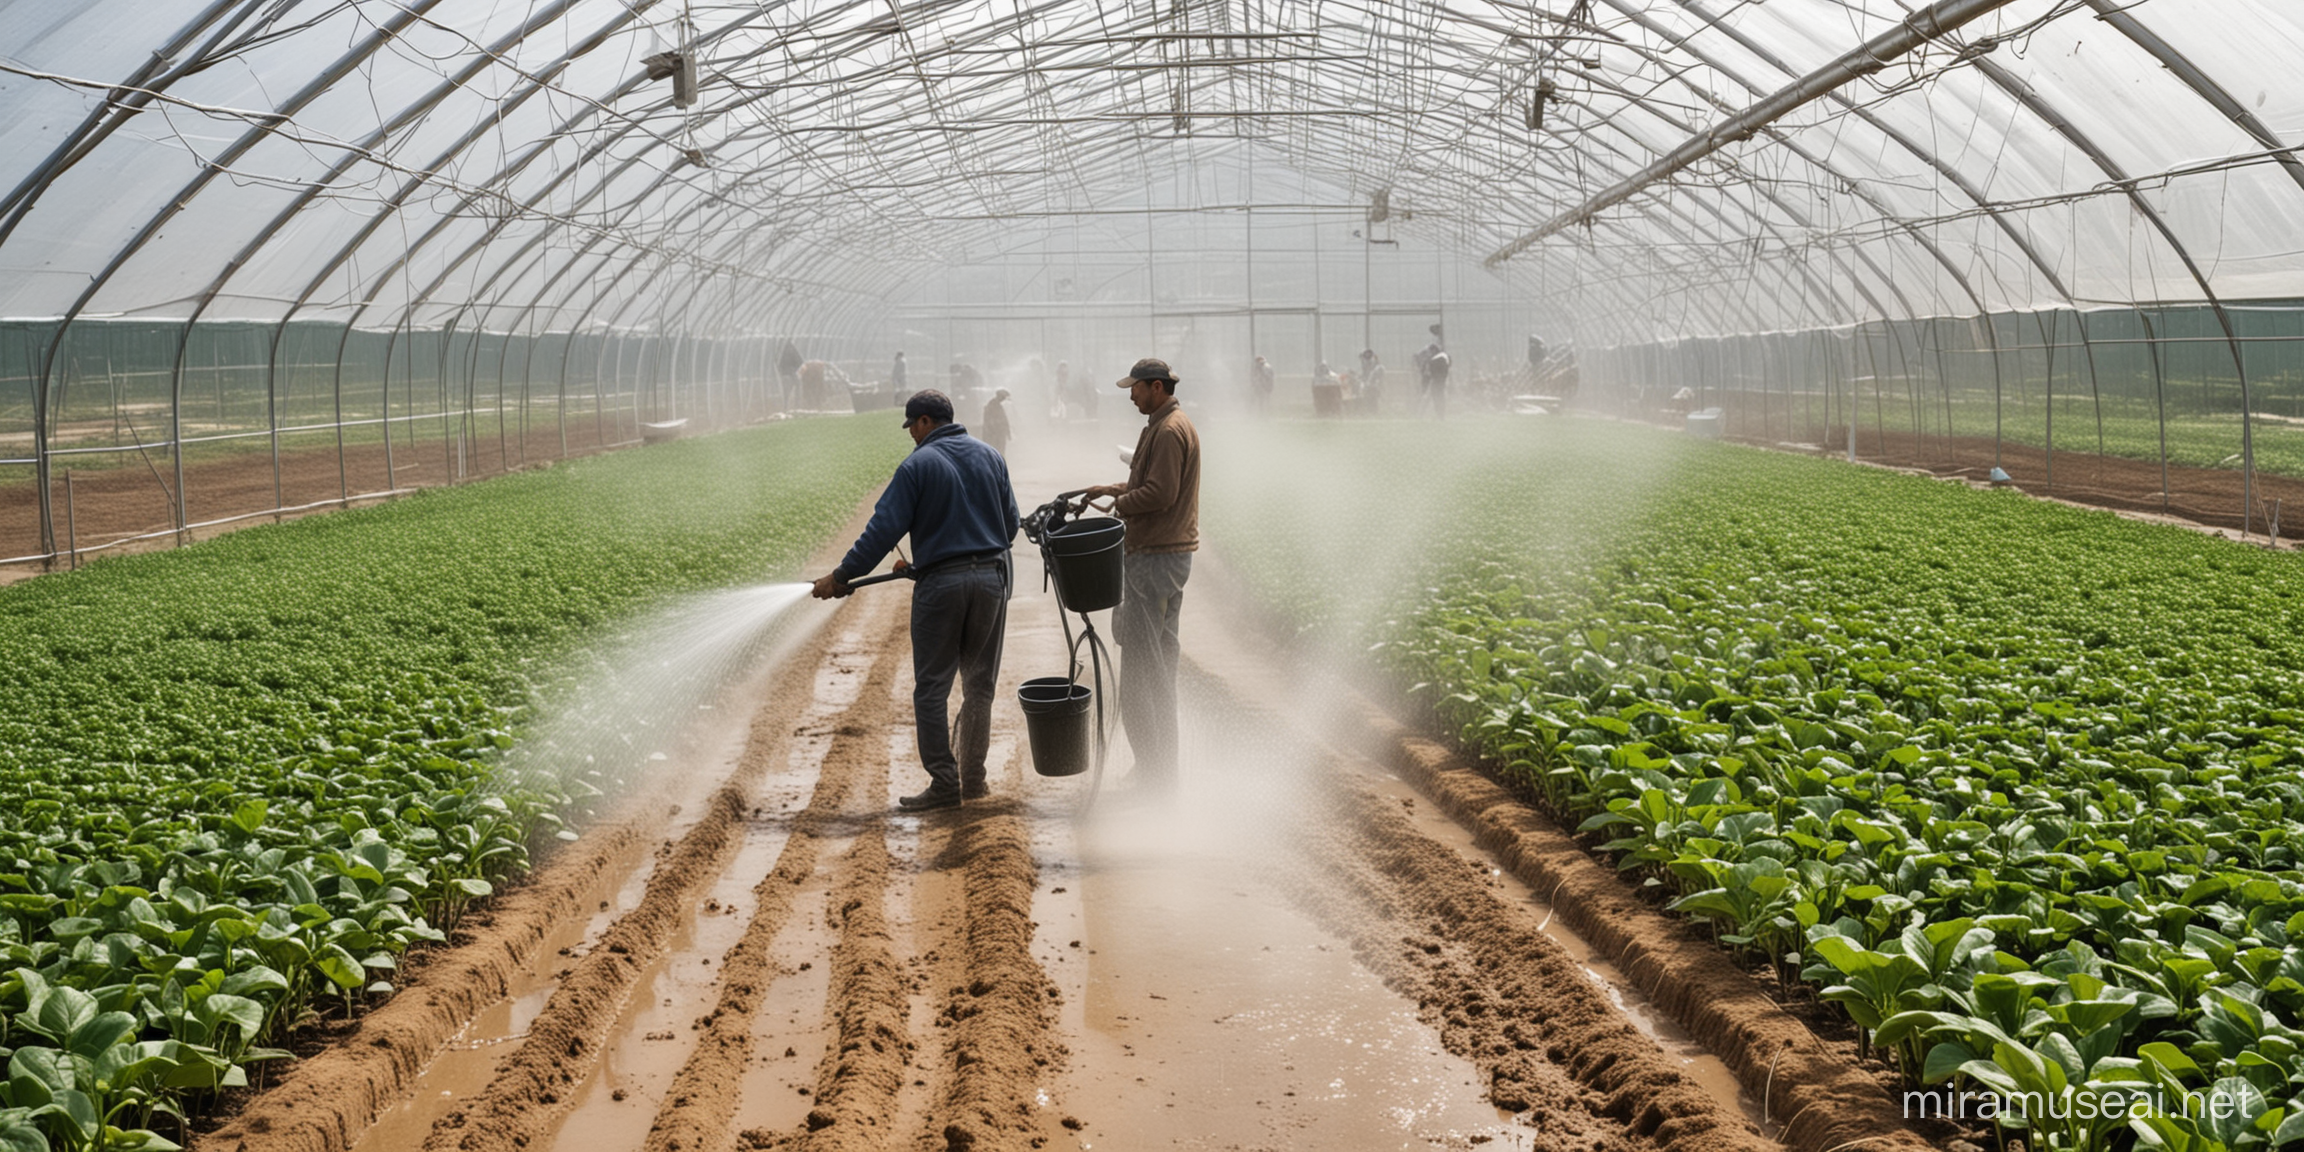 Efficient Watering Practices in Greenhouses Farmers Tending to Crops